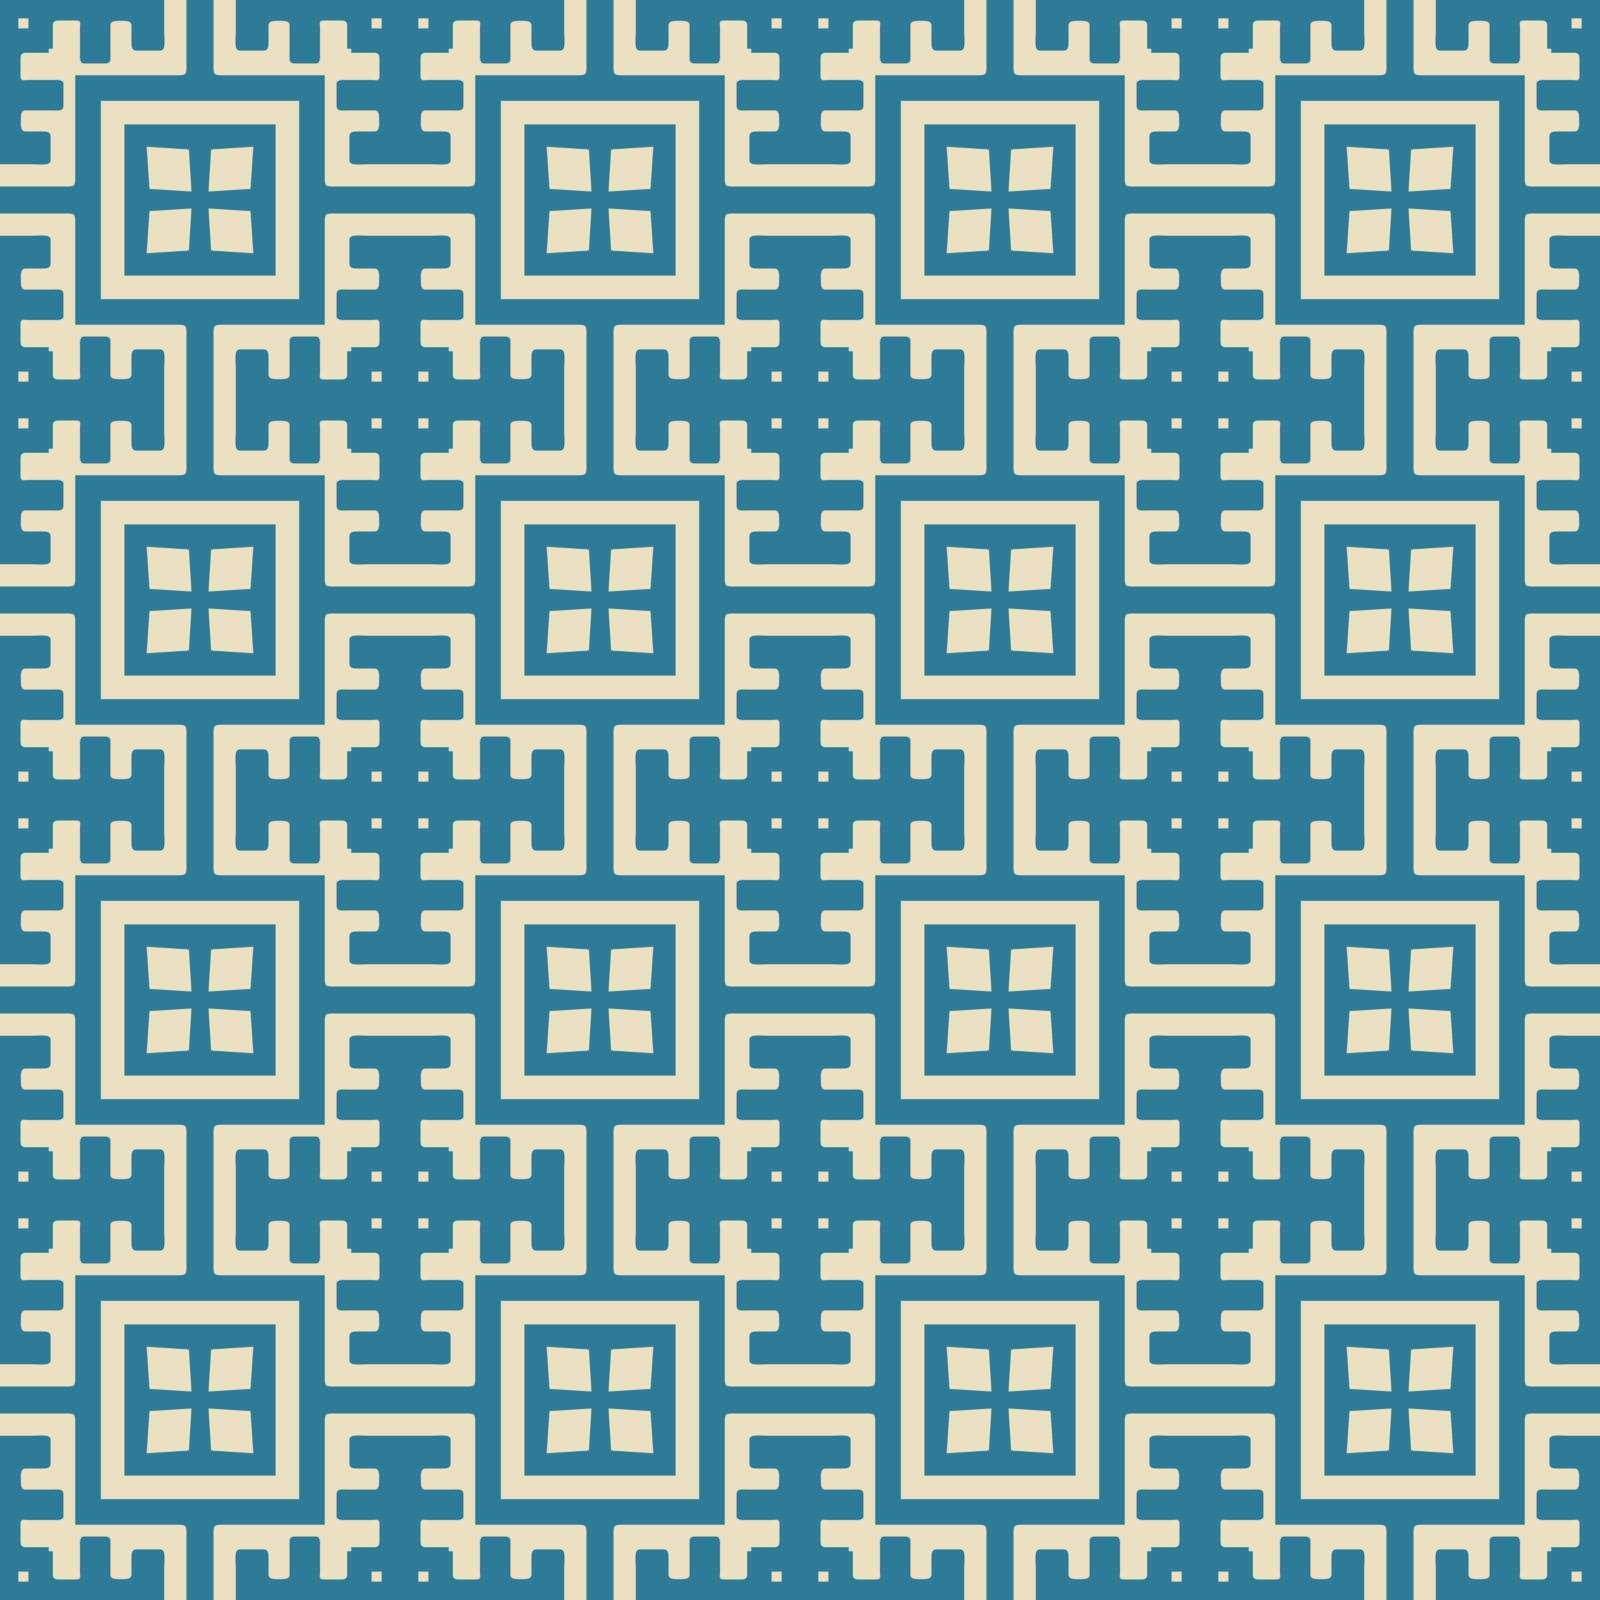 Seamless illustrated pattern made of abstract elements in beige and turquoise